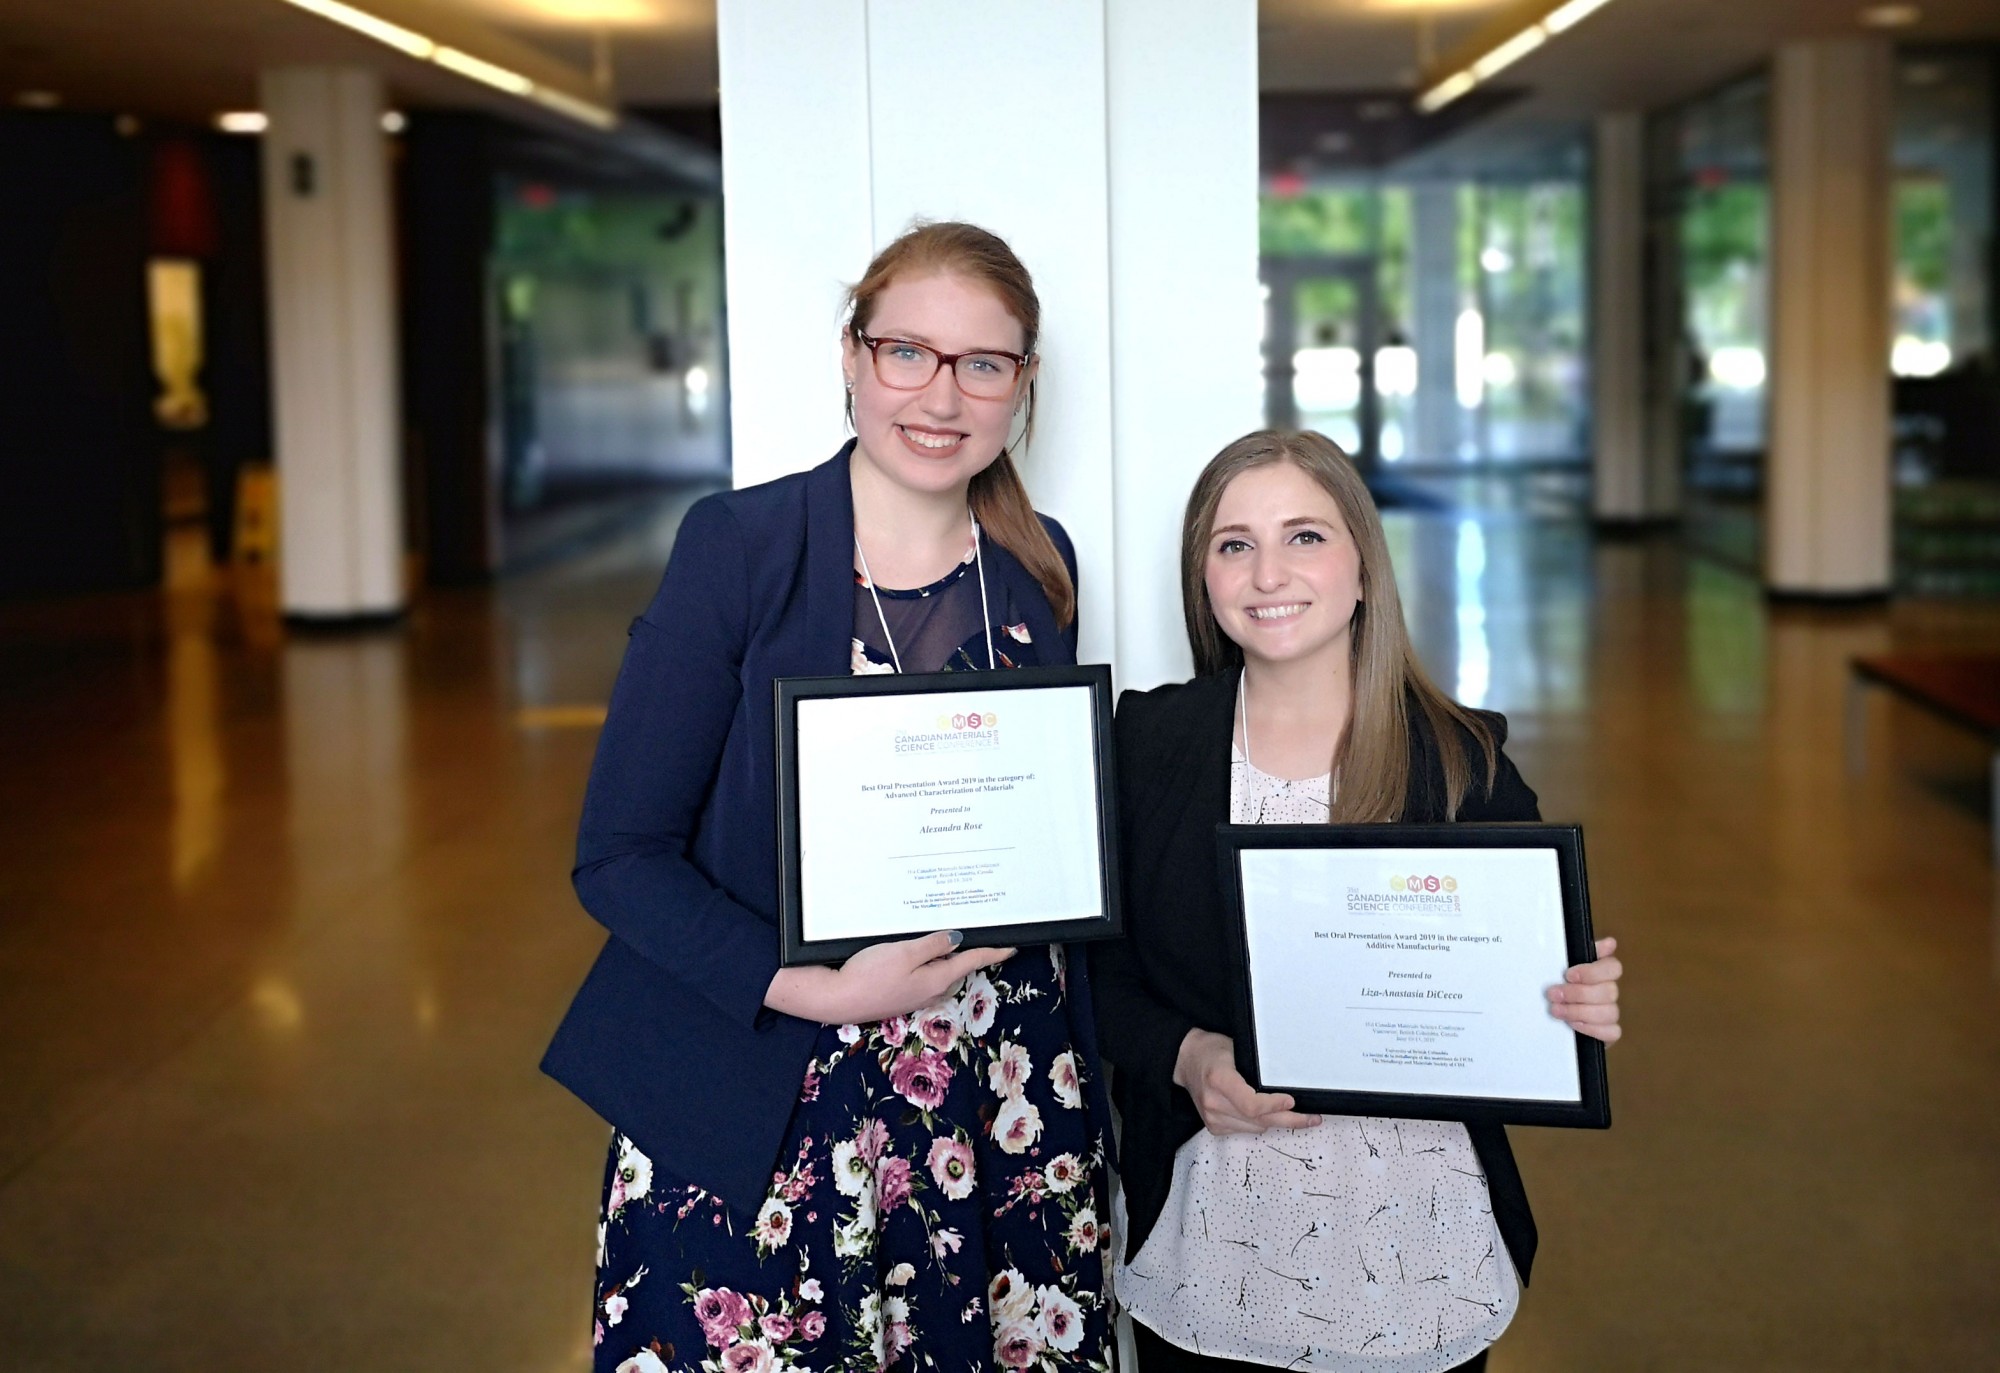 masters students of engineering materials claimed prizes for their oral presentations